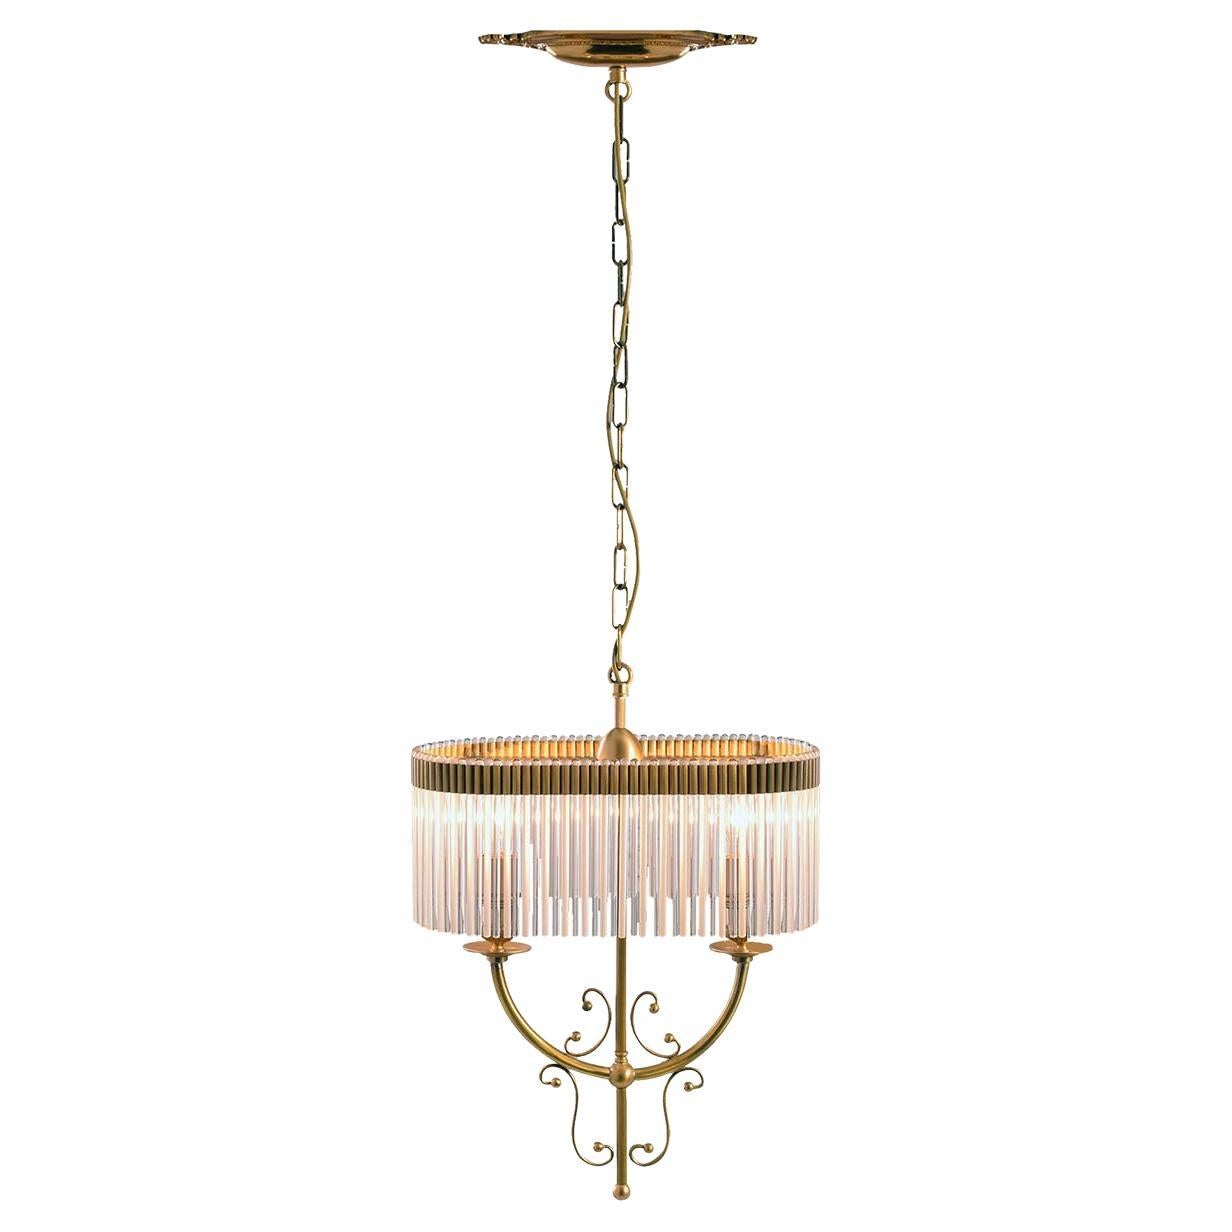 Seicento 2-Light Chandelier by Luca Bussacchini For Sale